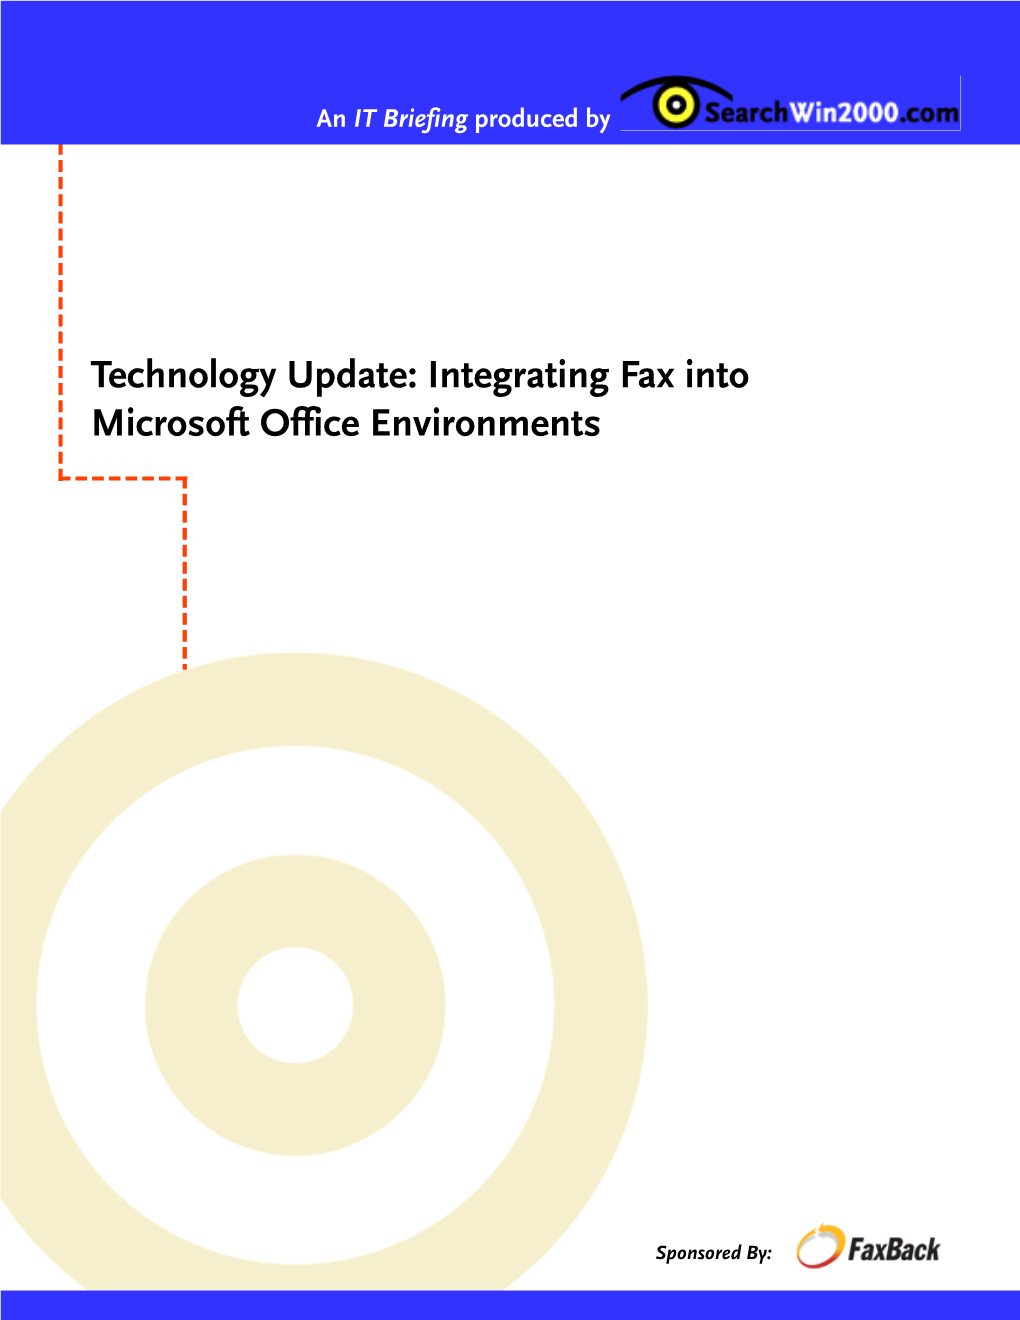 Integrating Fax Into Microsoft Office Environments